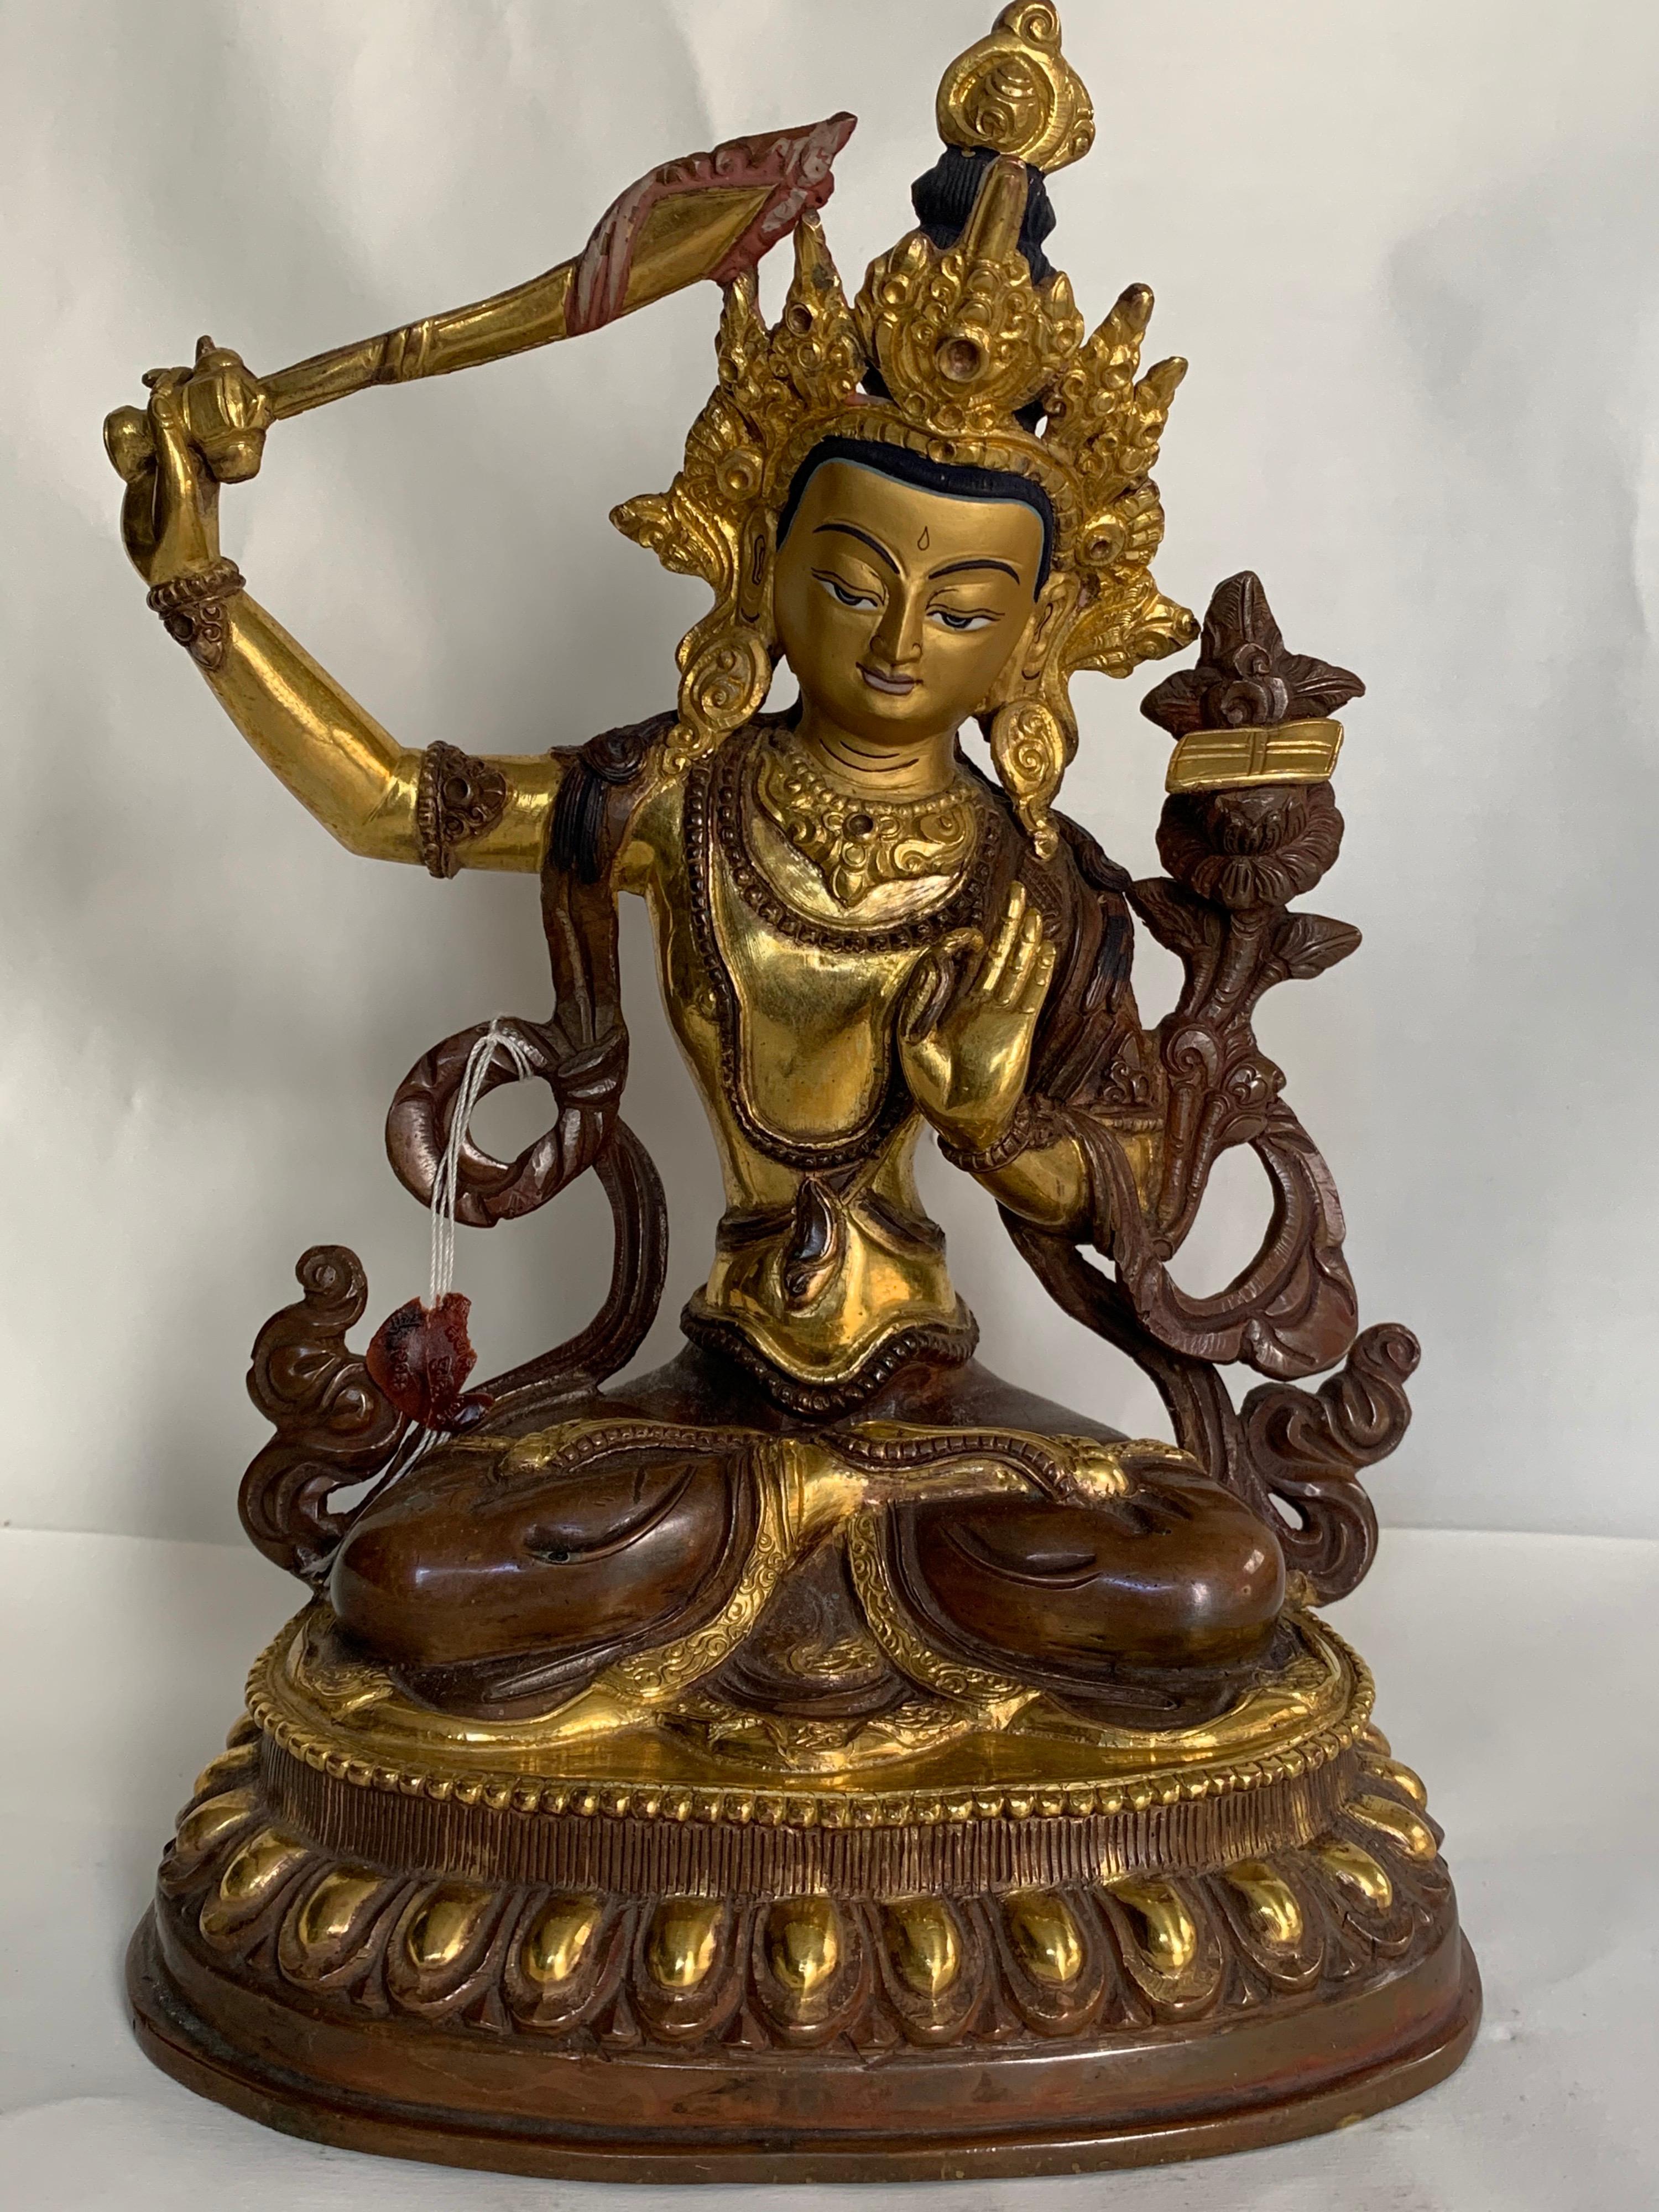 Unknown Figurative Sculpture - Manjushree Statue 9 Inch with 24K Gold Handcrafted by Lost Wax Process